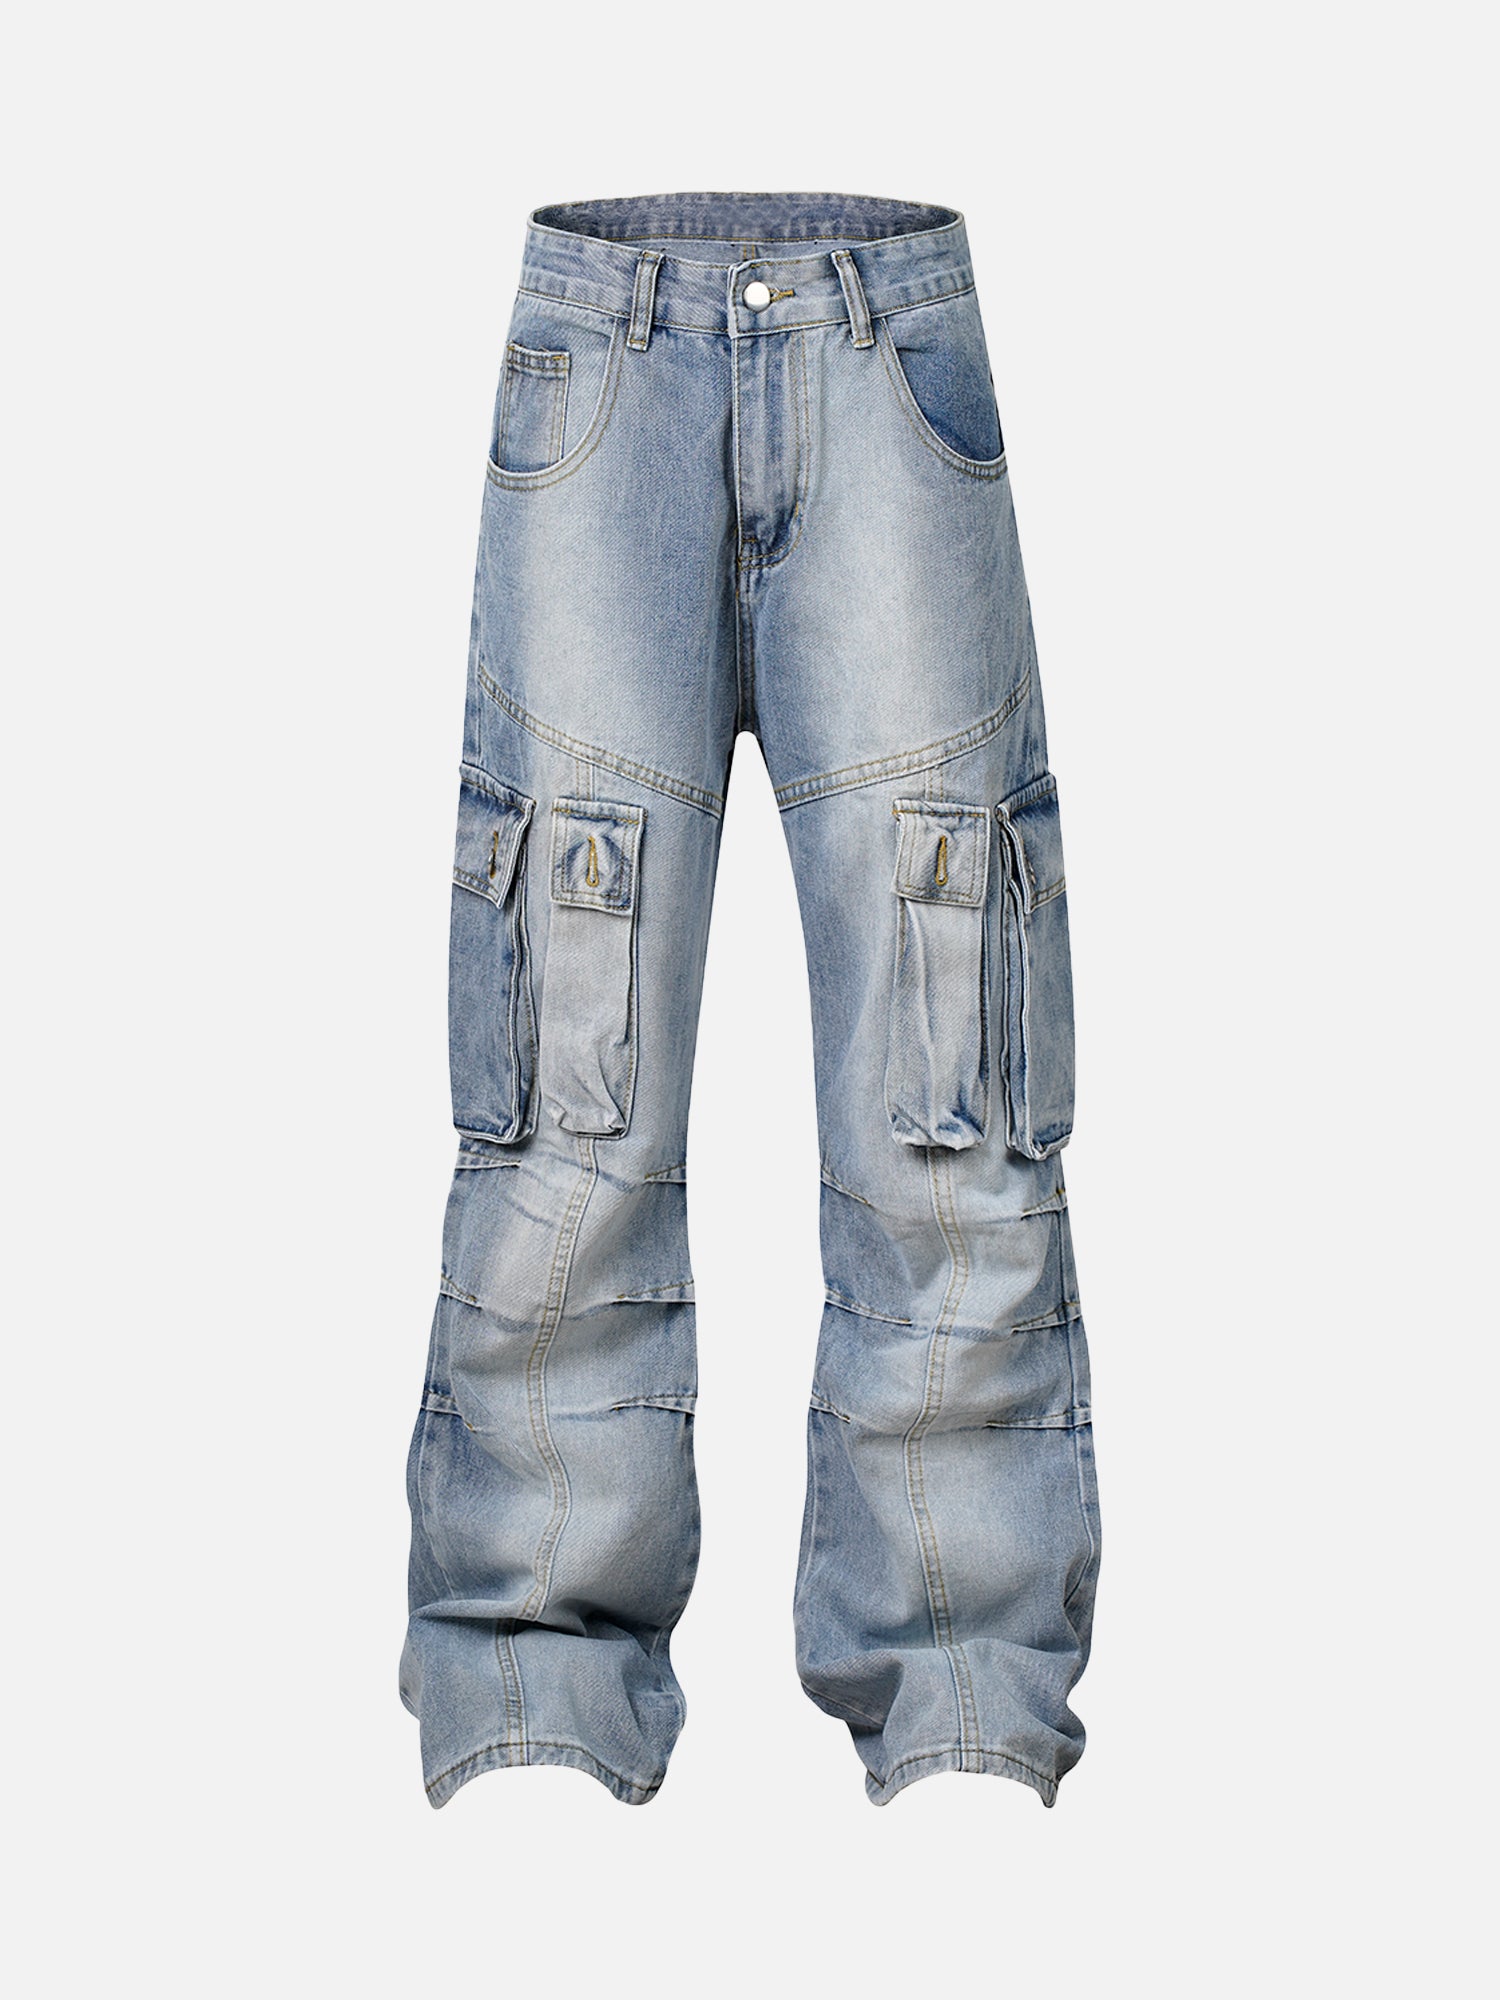 Thesupermade American Street Style Washed Distressed Jeans